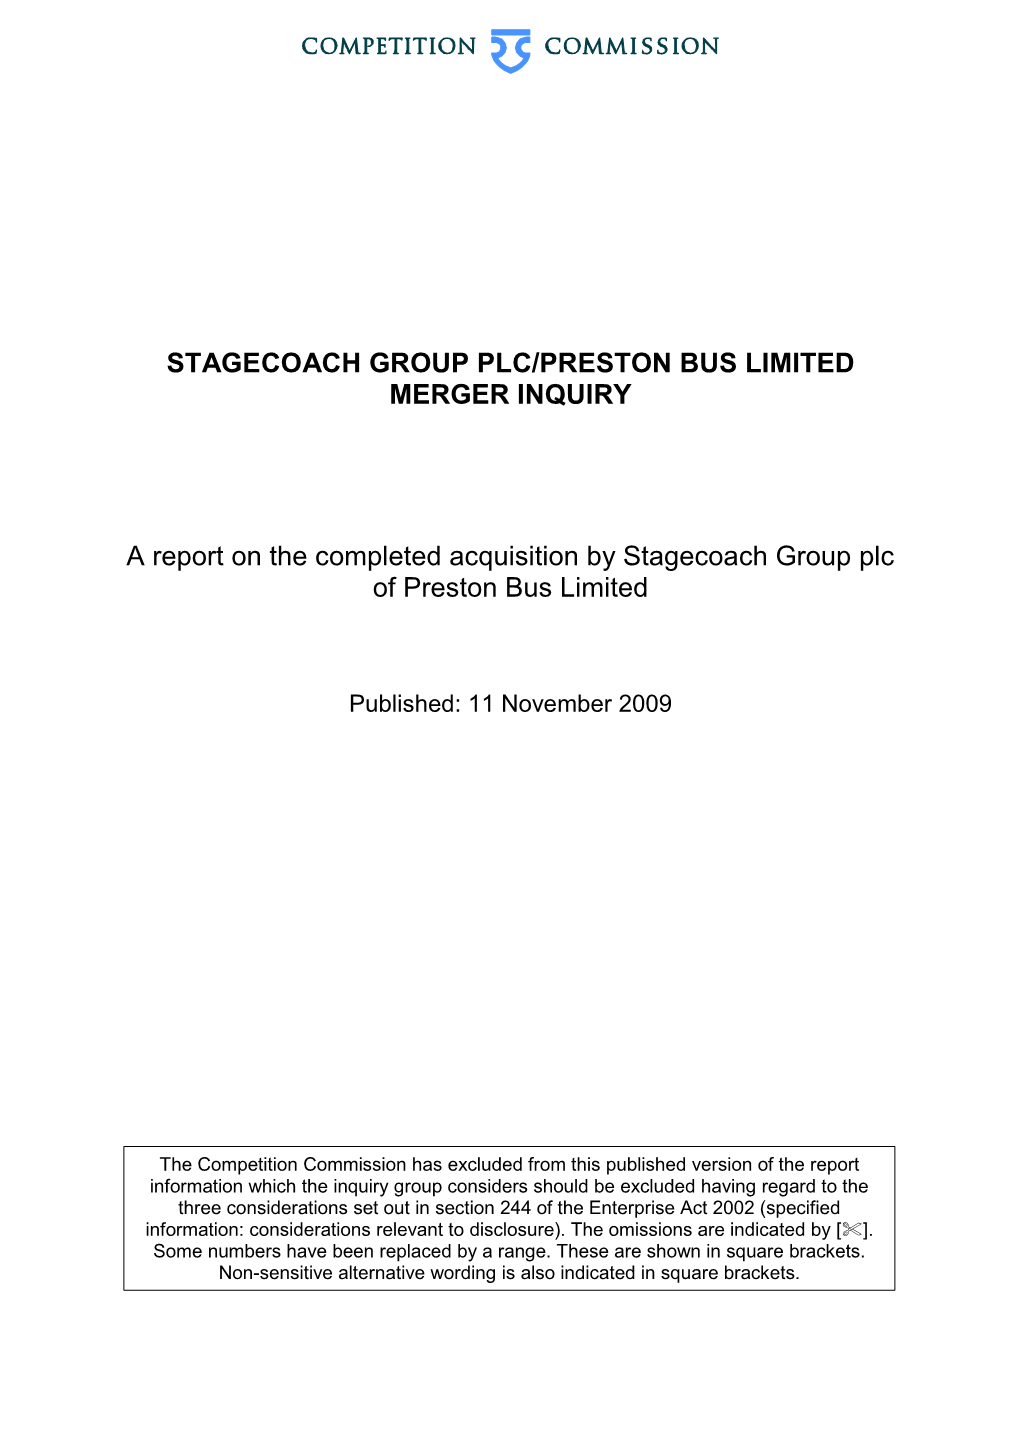 Stagecoach Group Plc/Preston Bus Limited Merger Inquiry